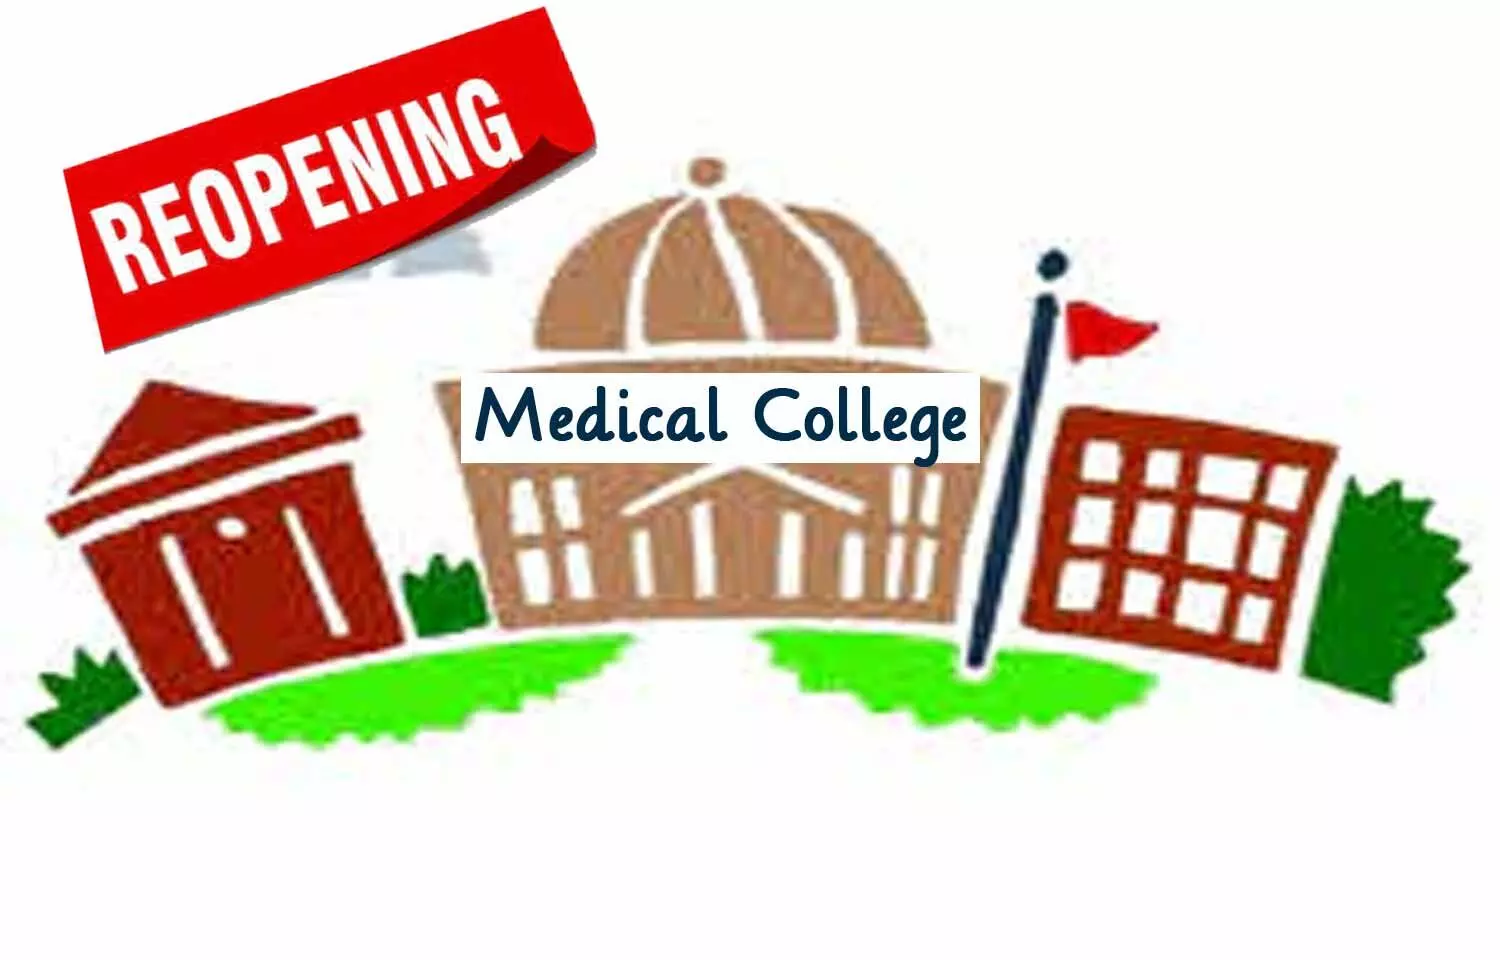 Odisha: All Medical Colleges To Reopen From December 1